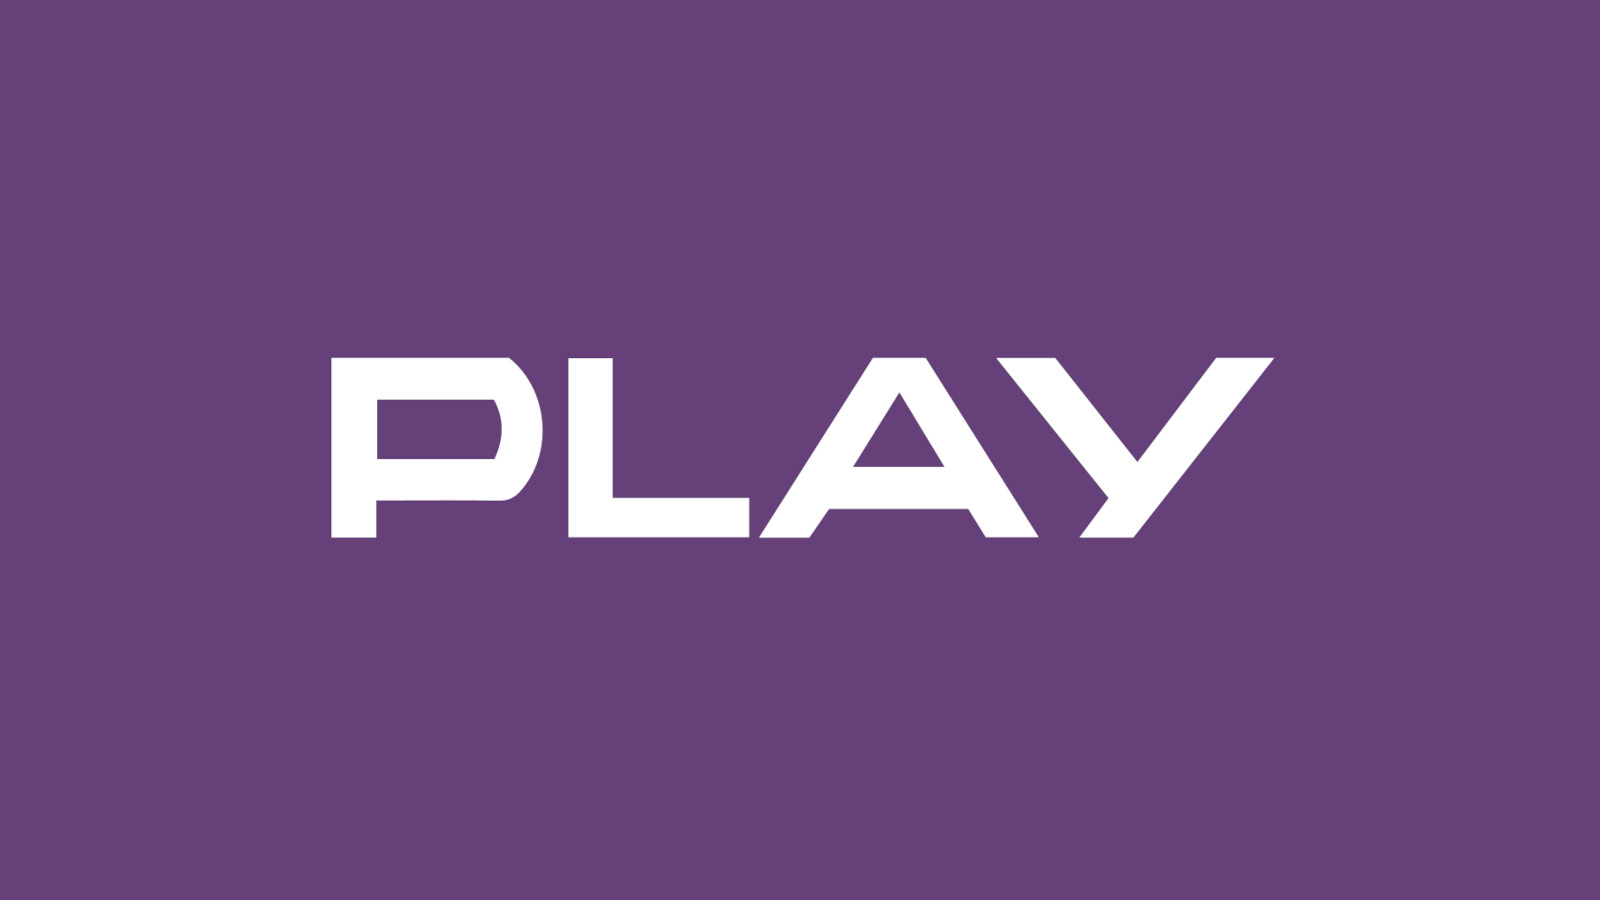 PLAY 300 PLN Mobile Top-up PL